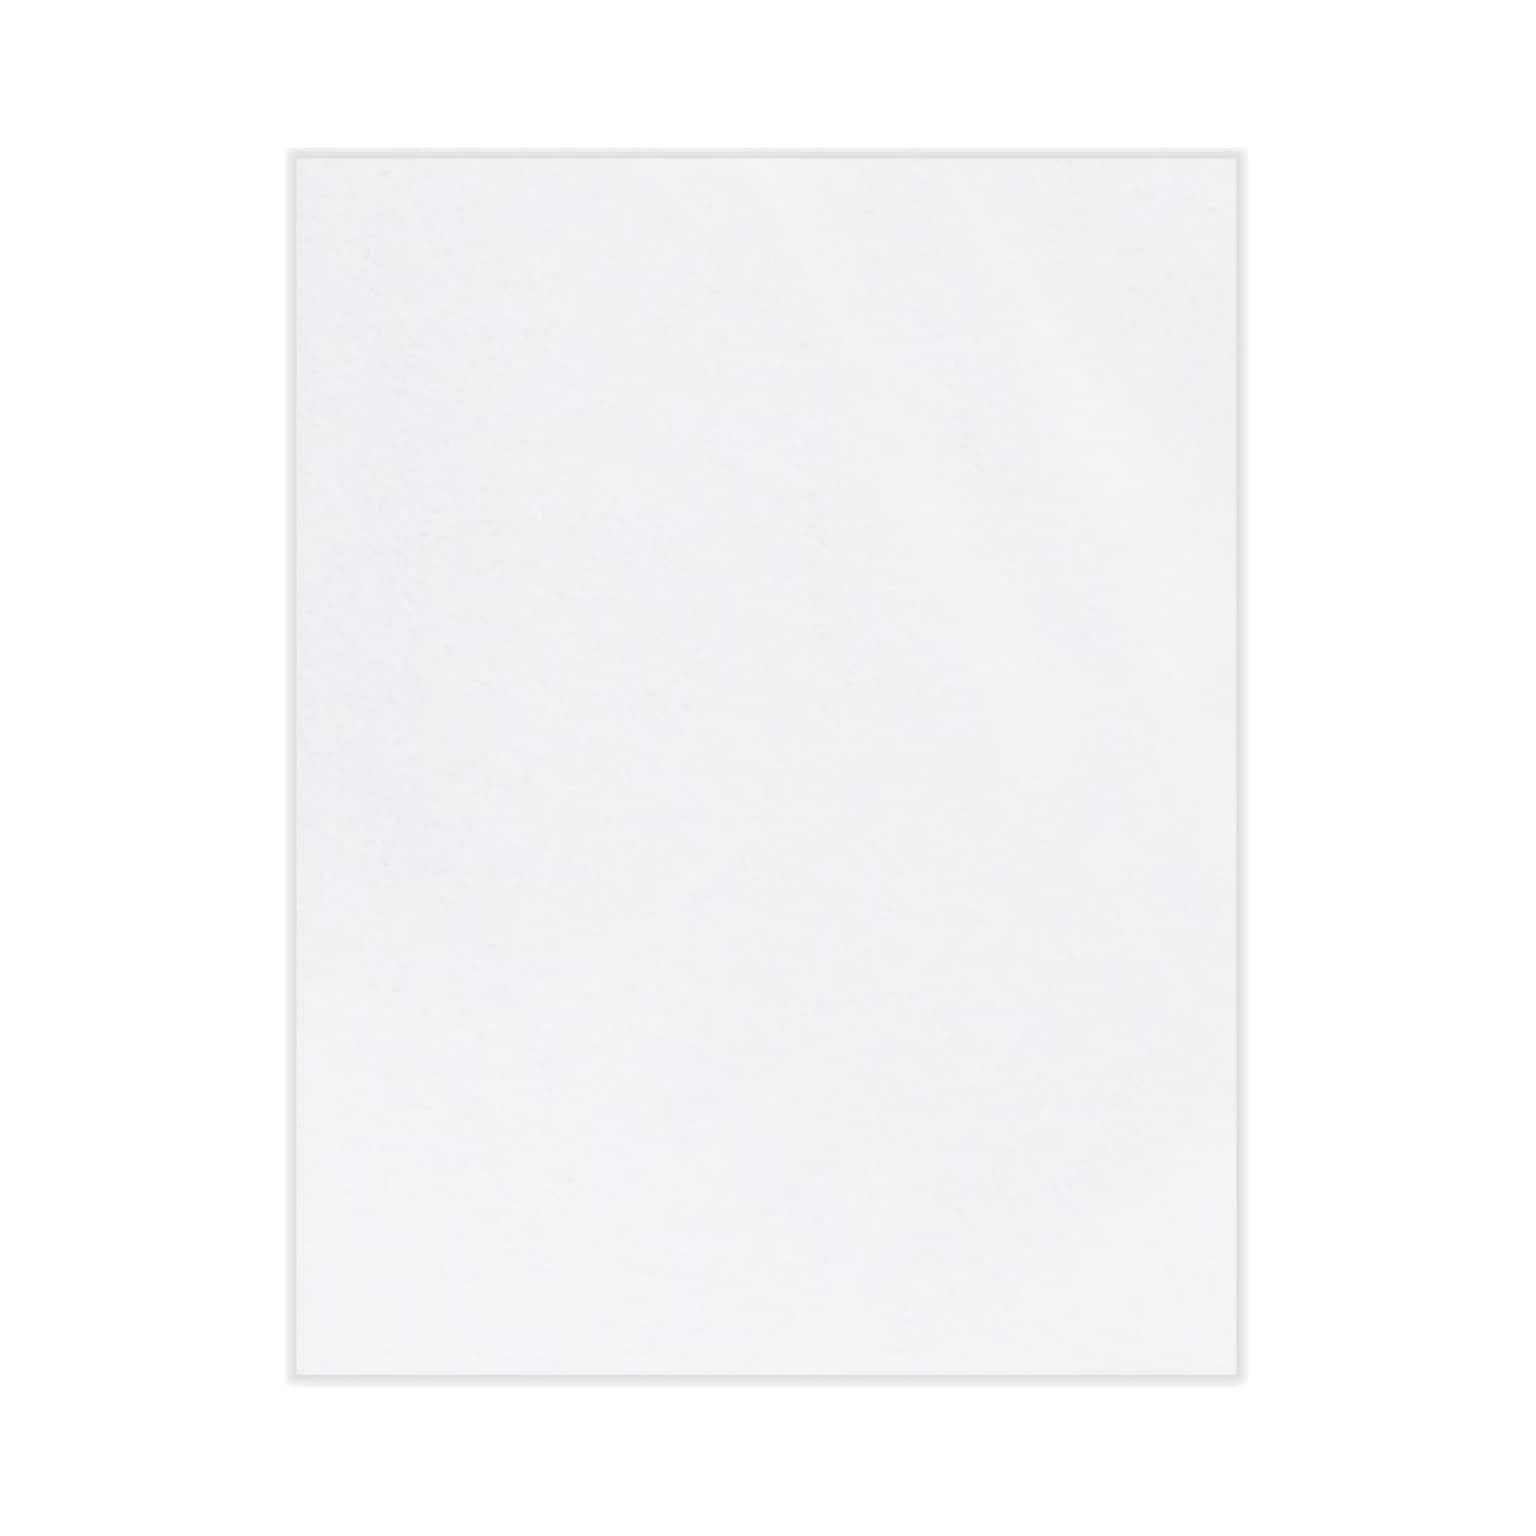 Lux Cardstock Reich Paper 8.5 x 11 inch, Bright White 250/Pack